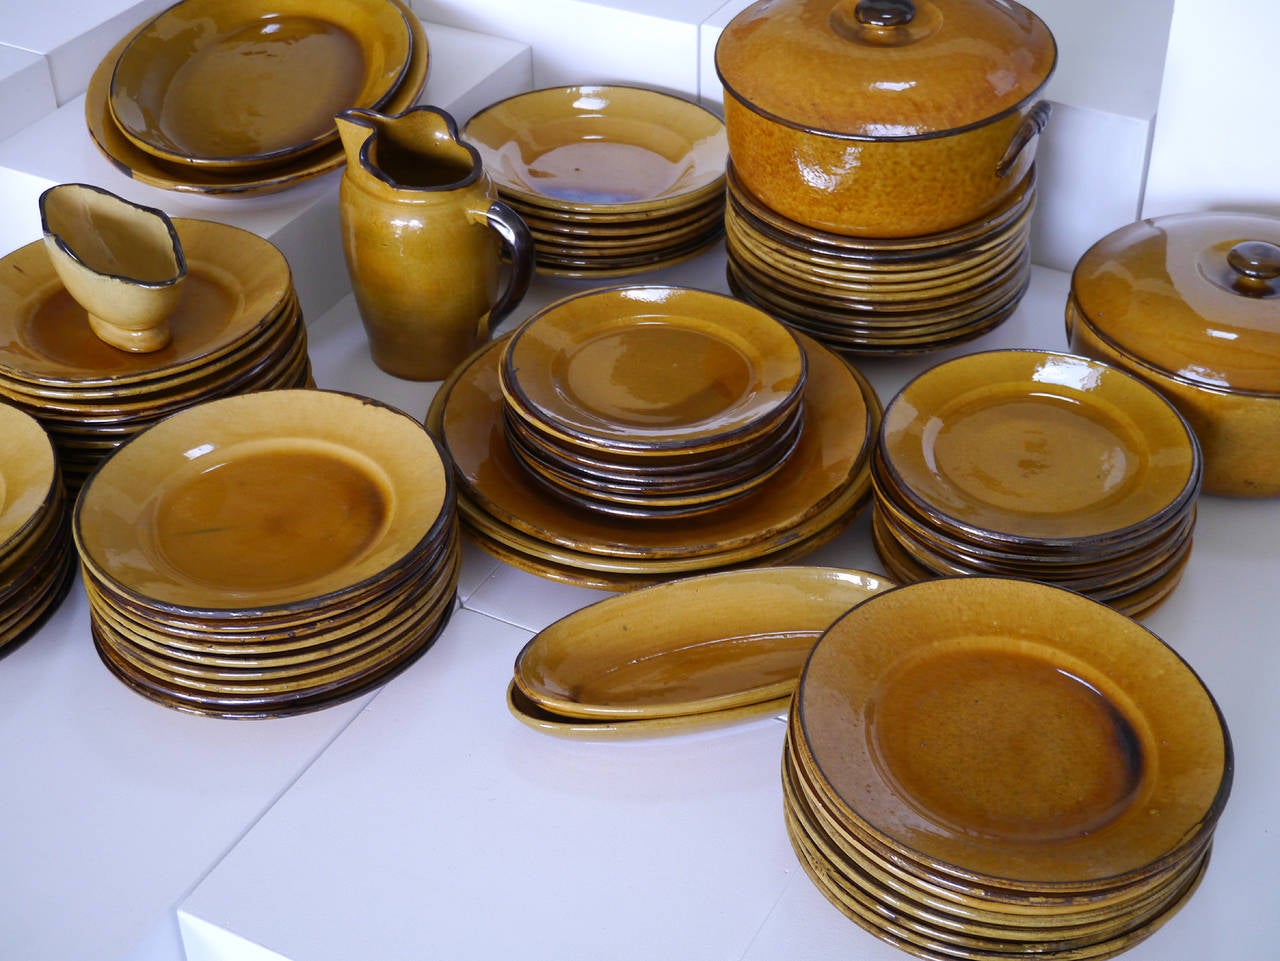 Country Set of 83 Aegitna Dishes by Saltalamacchia, Vallauris, circa 1950